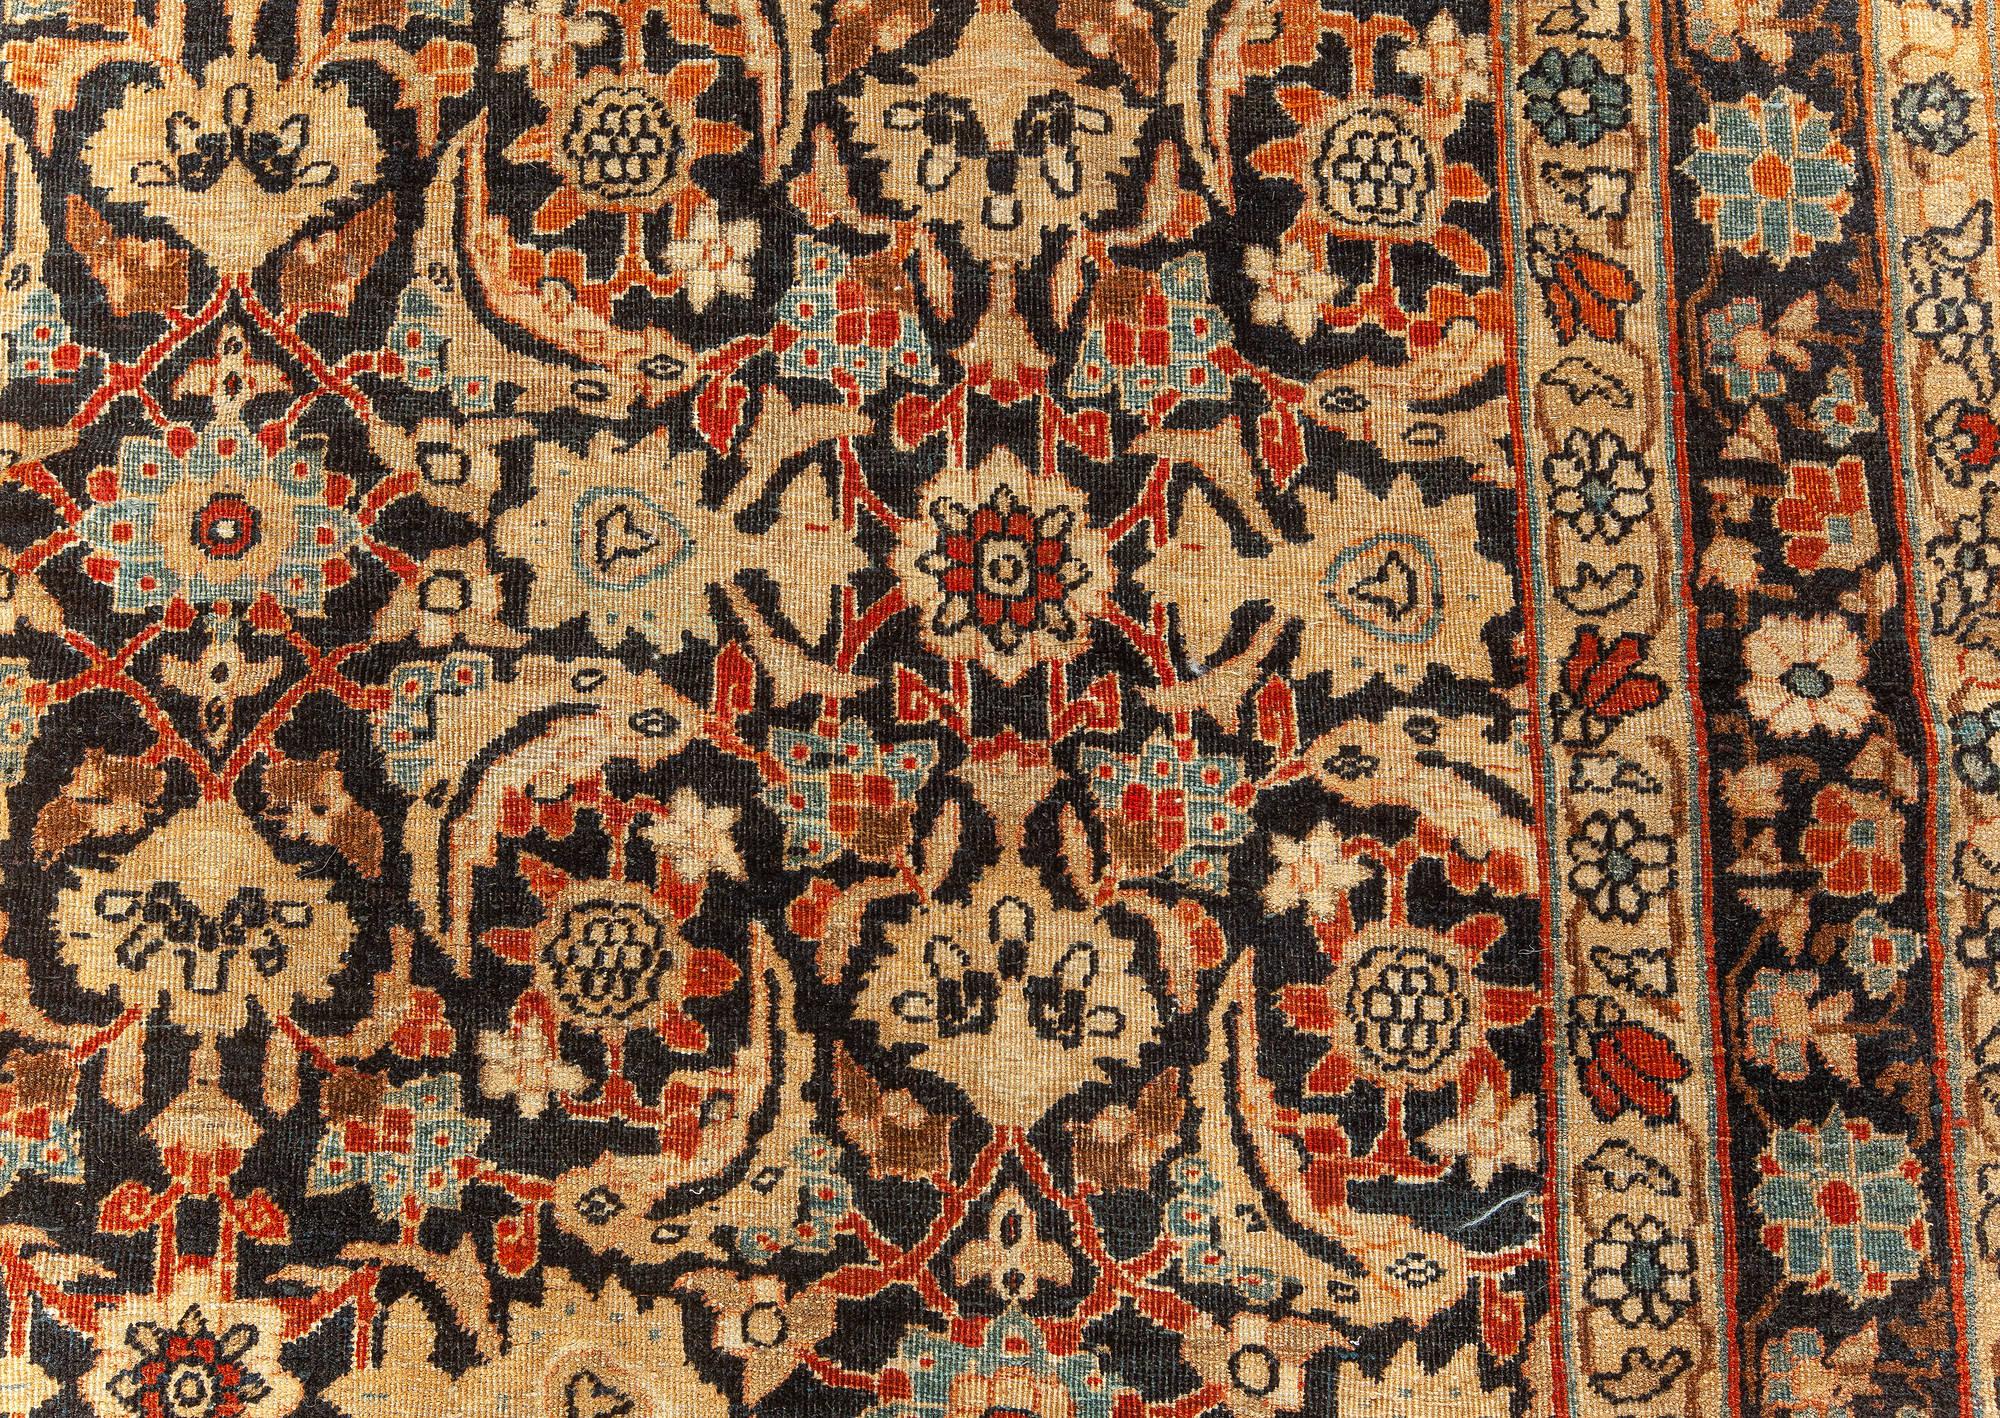 Antique Kirman Rug in Black, Red and Yellow
Size: 12'7